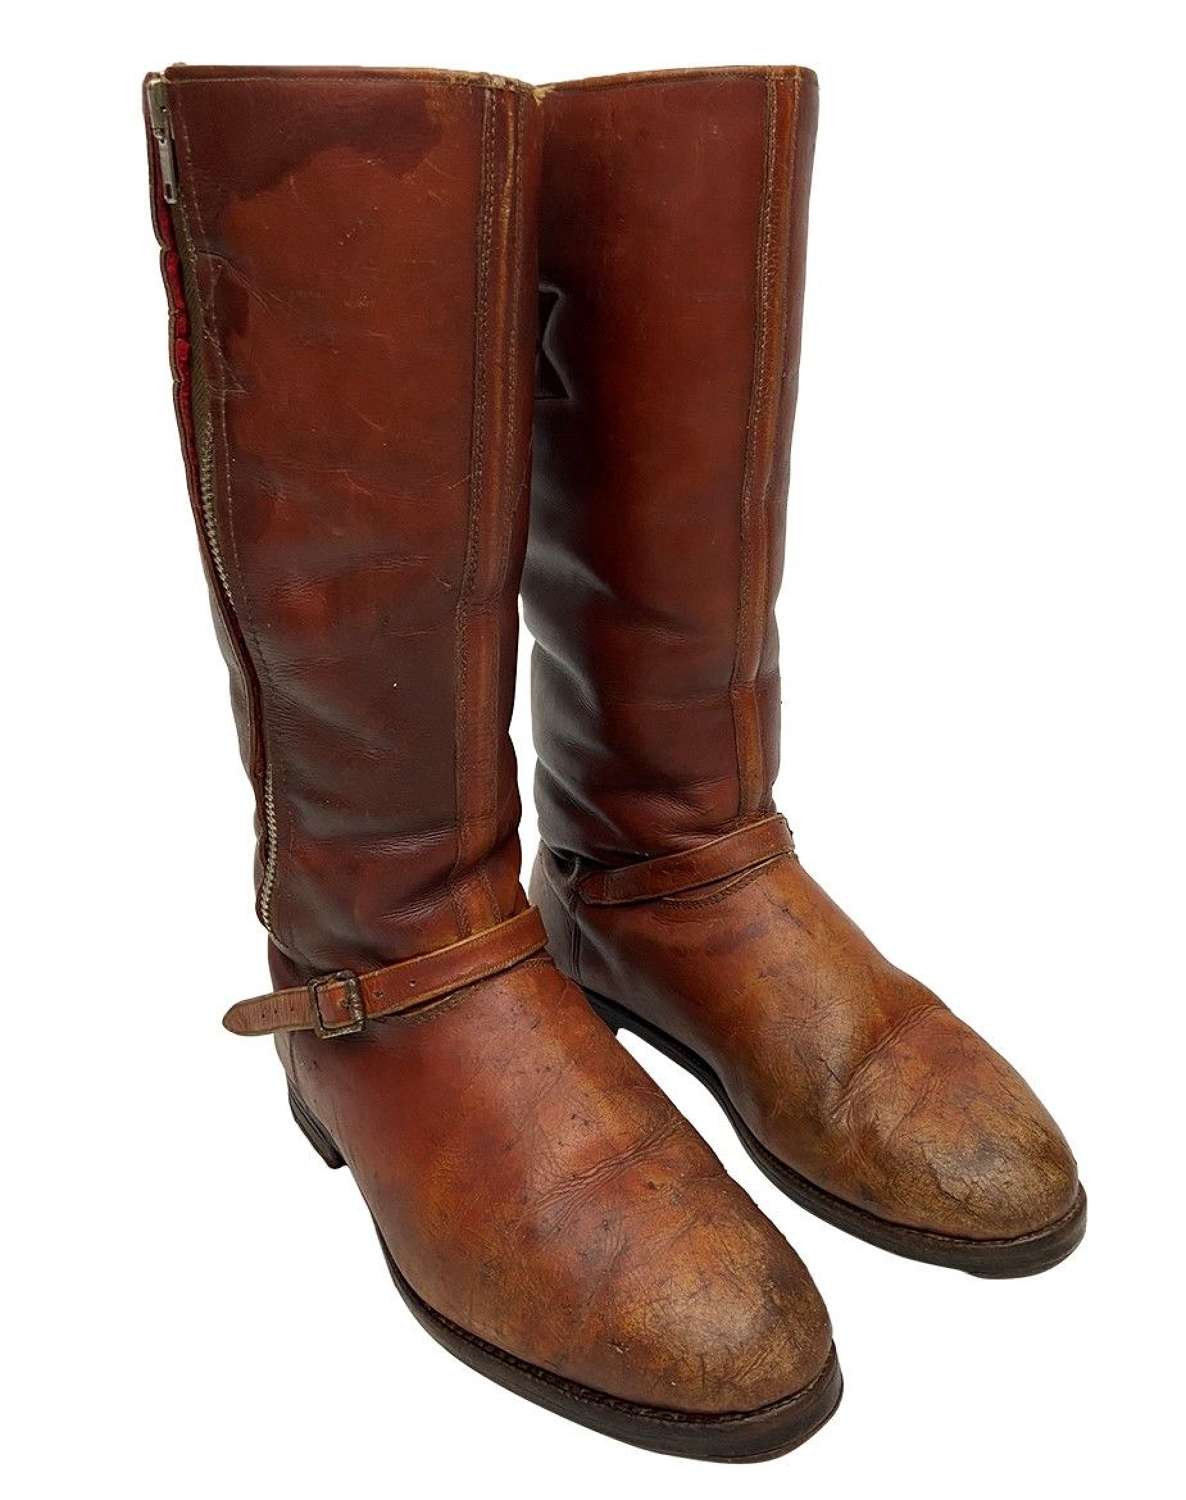 Original 1940s Brown Leather Flying Boots